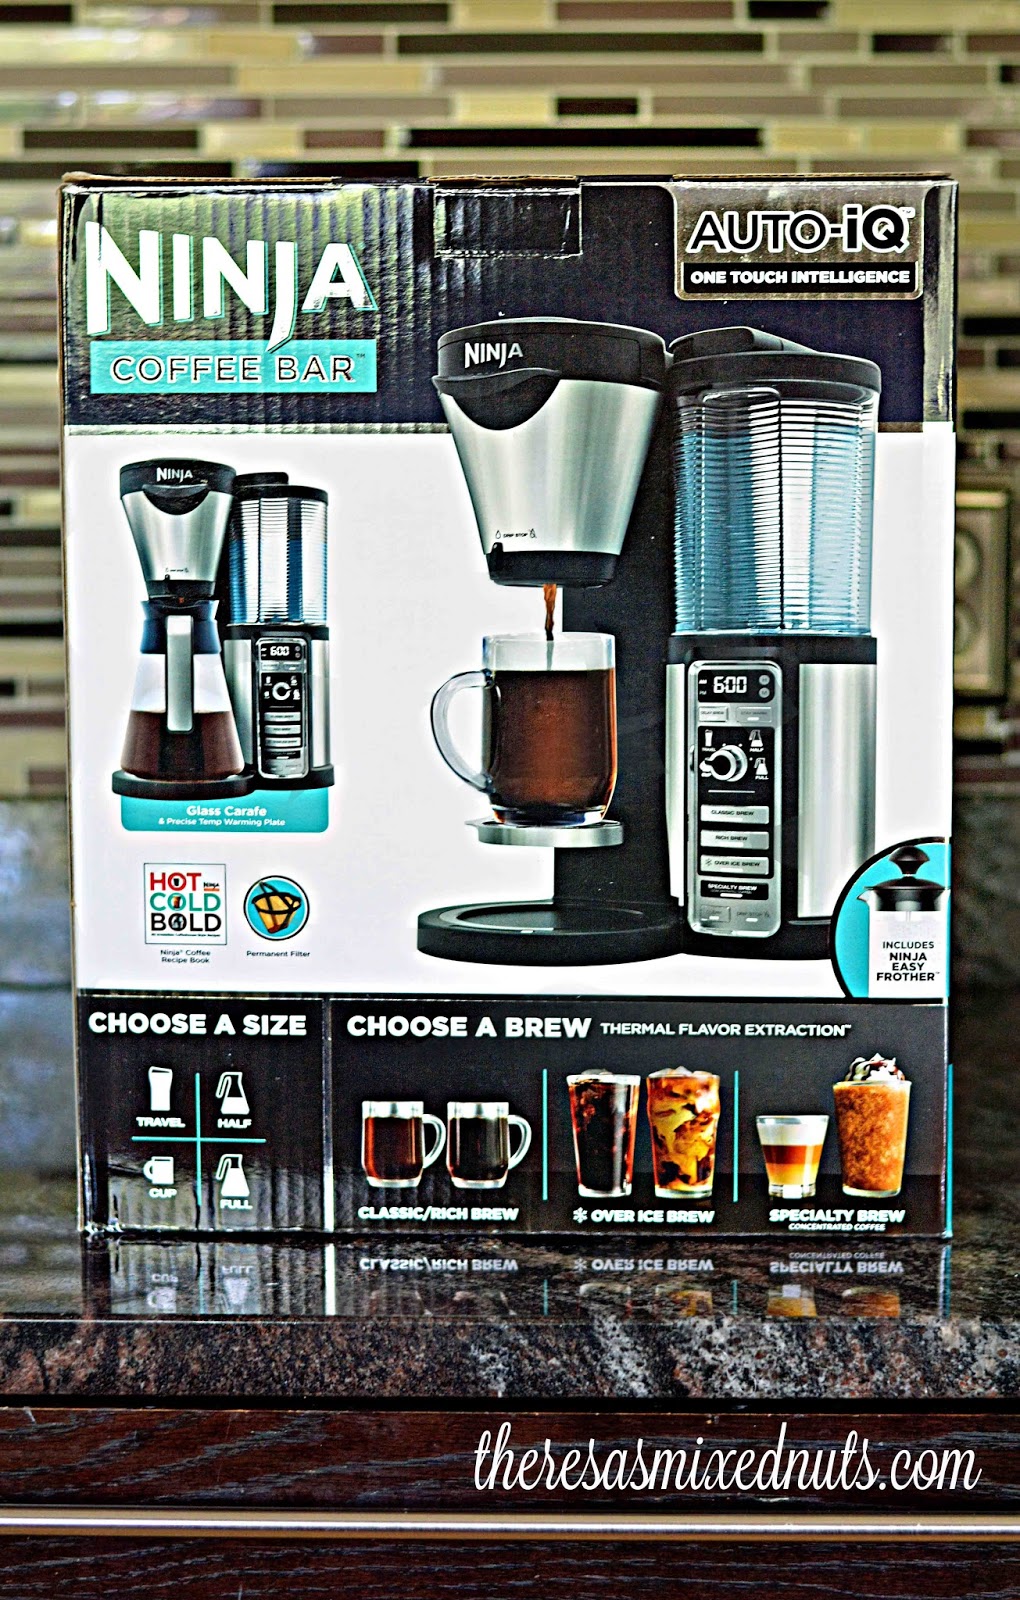 Ninja Coffee Bar with Double-Walled Thermal Carafe